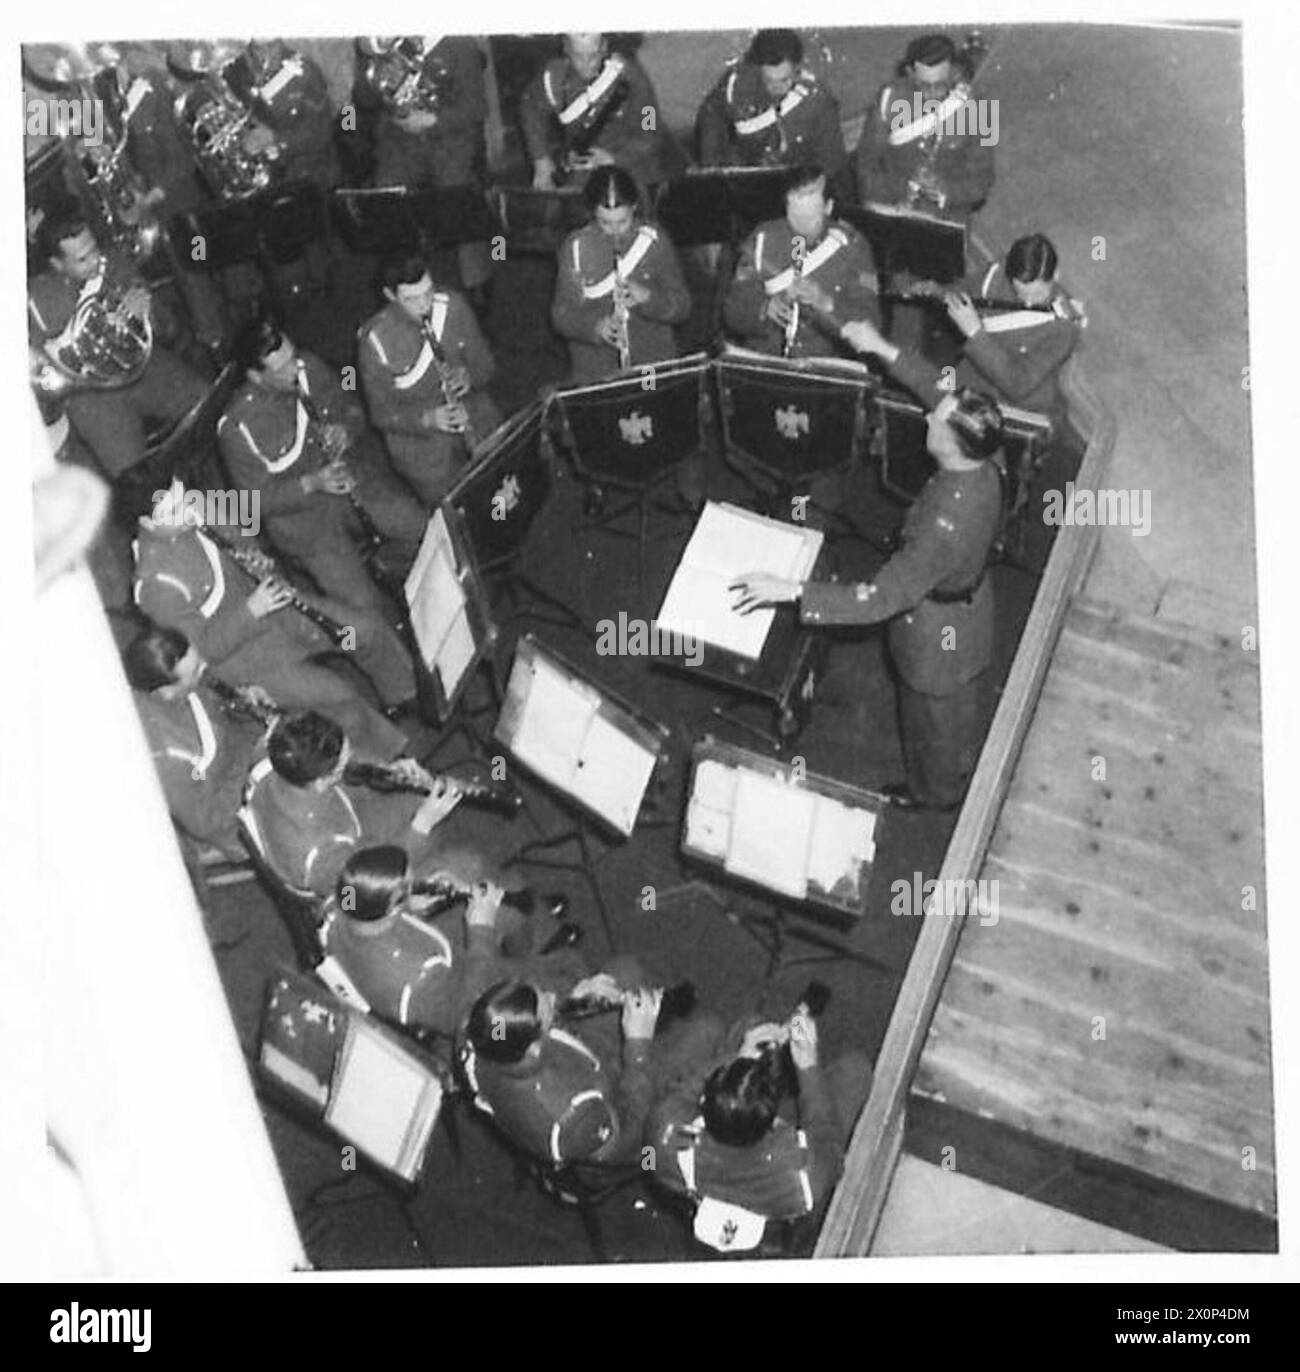 C.M.F. ARTS FESTIVAL : ROME 1946 - The Band of the Royal Dragoons, conducted by Mr. A.A. Singer, ARCM., giving a Festival performance at the NAAFI 'Alexander Club' on Tuesday afternoon 26th February Photographic negative , British Army Stock Photo